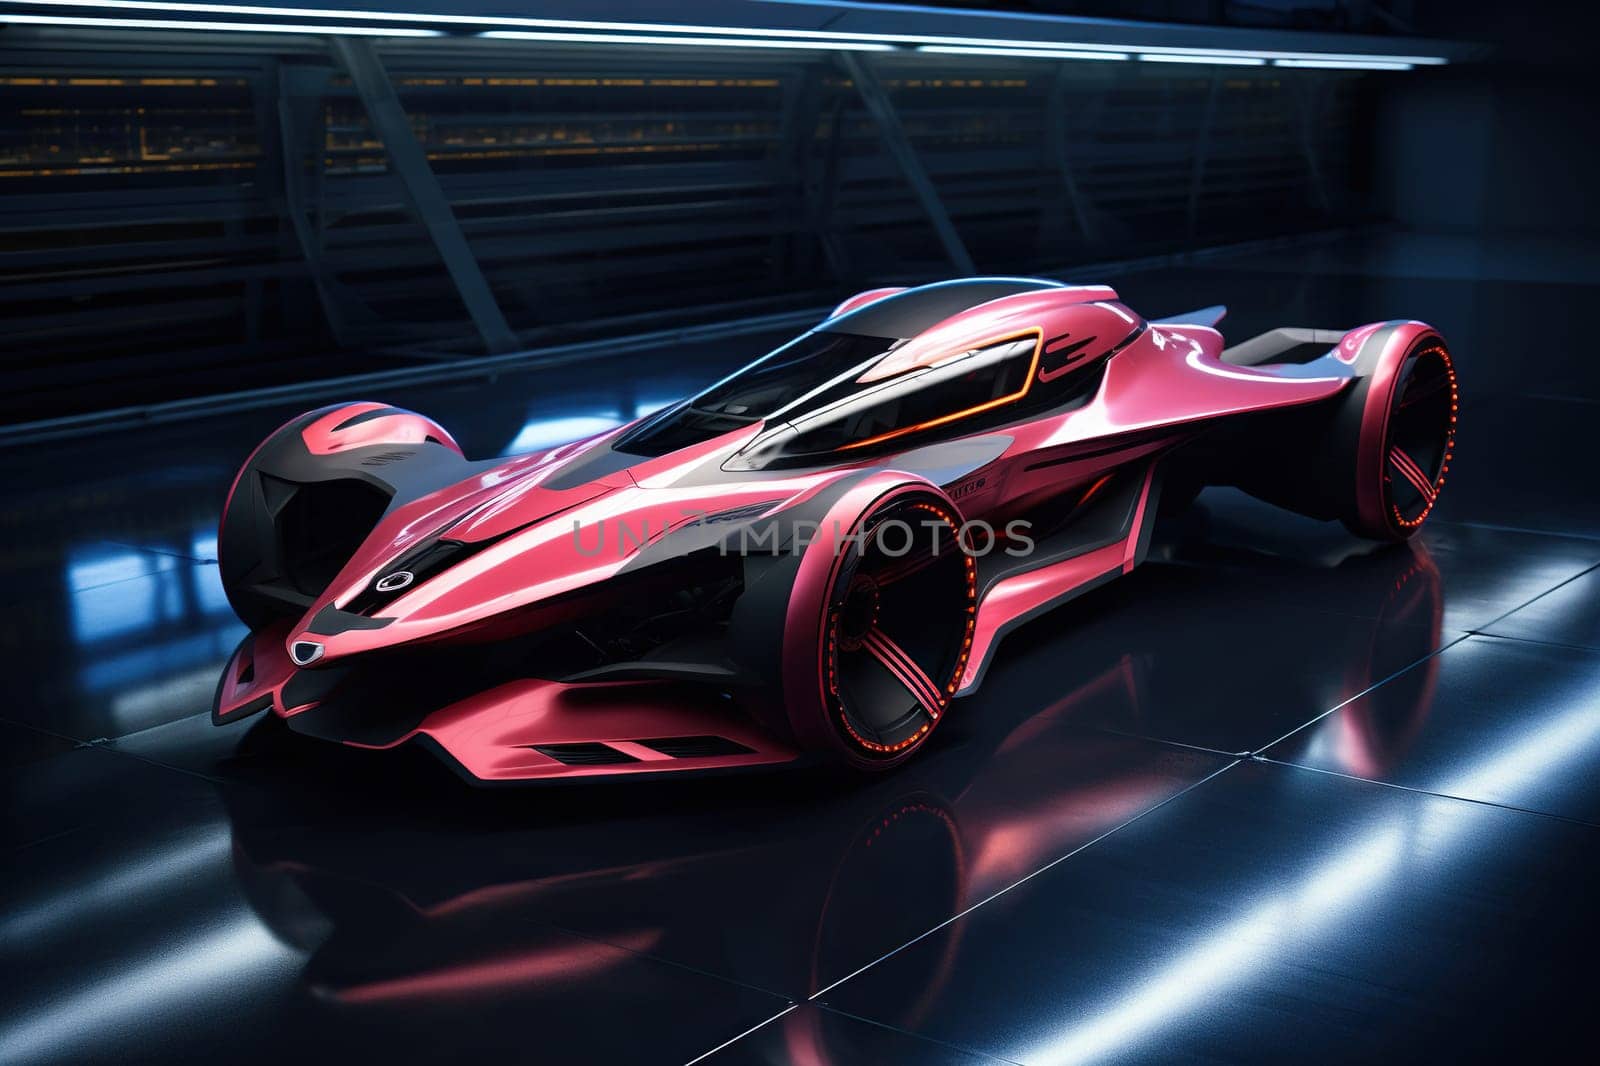 The concept of a futuristic sports car running in a tunnel with neon light strips.